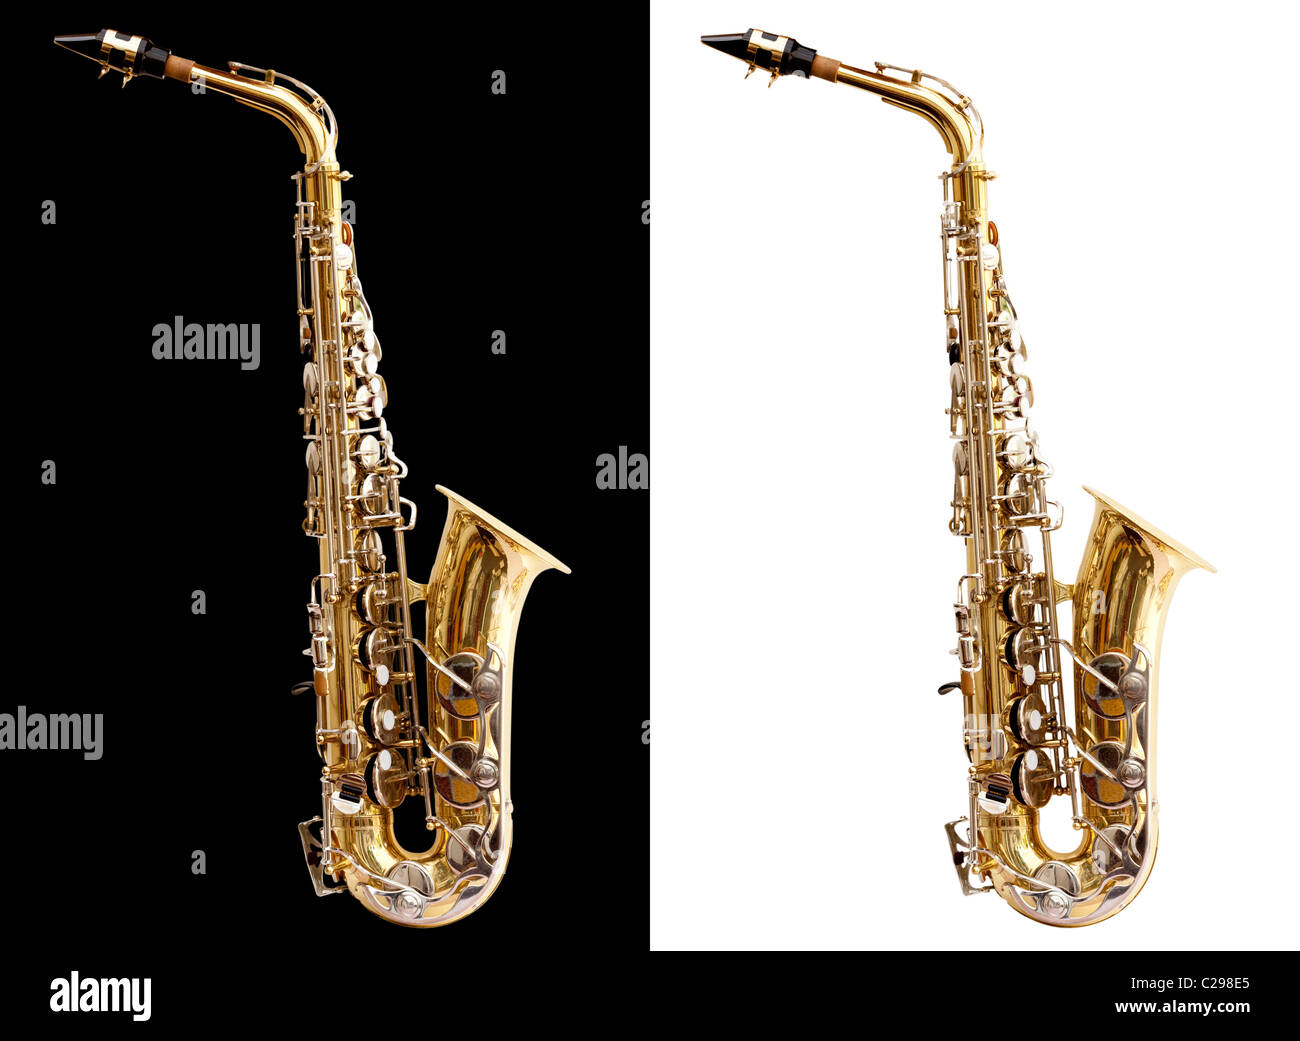 Isolated saxophone with clipping path on black and white for easy use Stock Photo